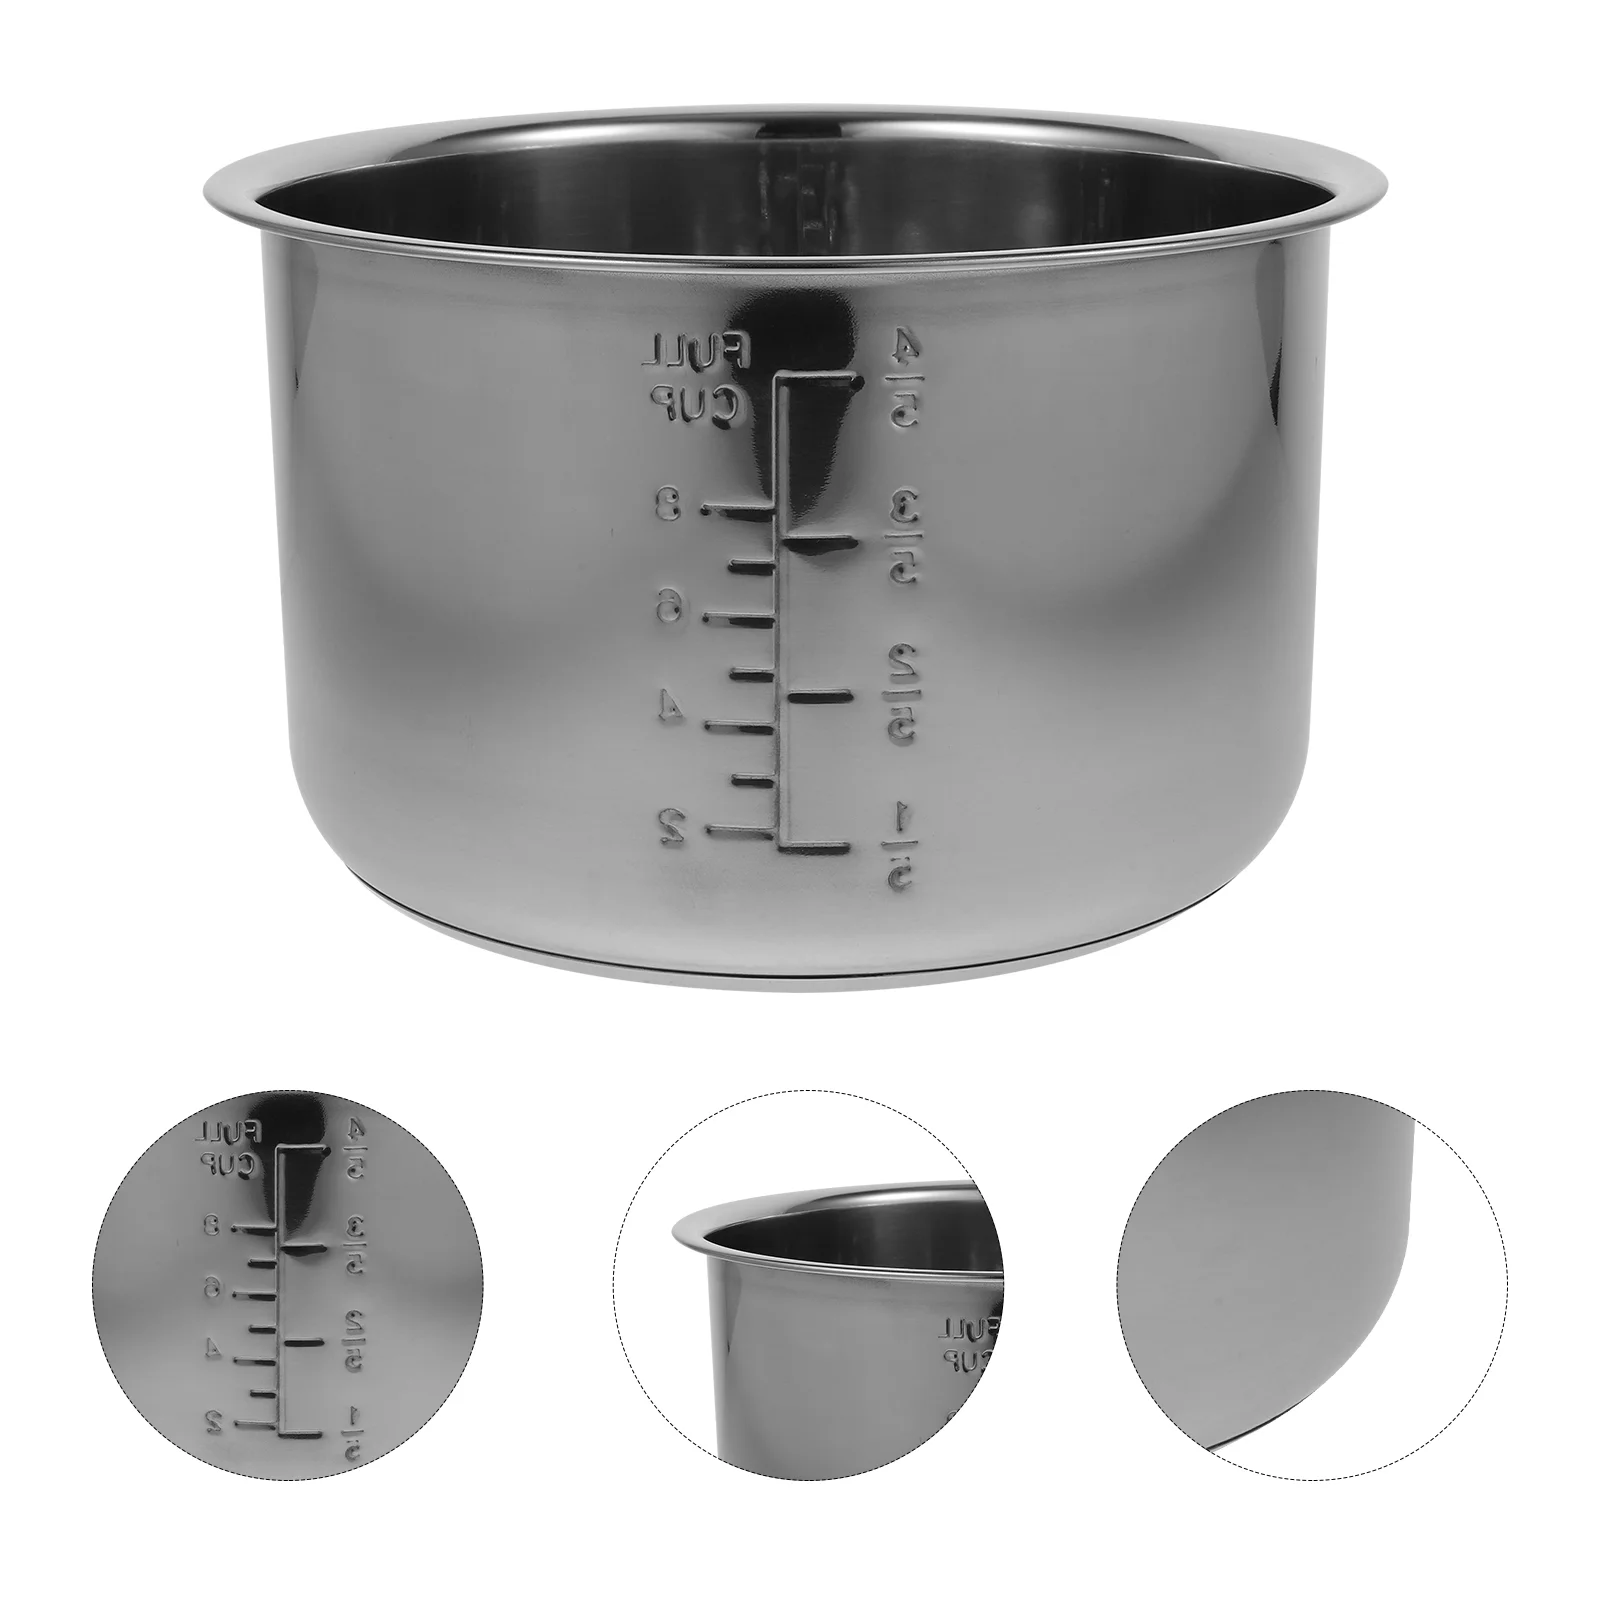 

Replacement Stainless Steel Electric Cooking Cooker Inner Pot Rice Cooker Pot Replacement for House Eating Kitchen Home